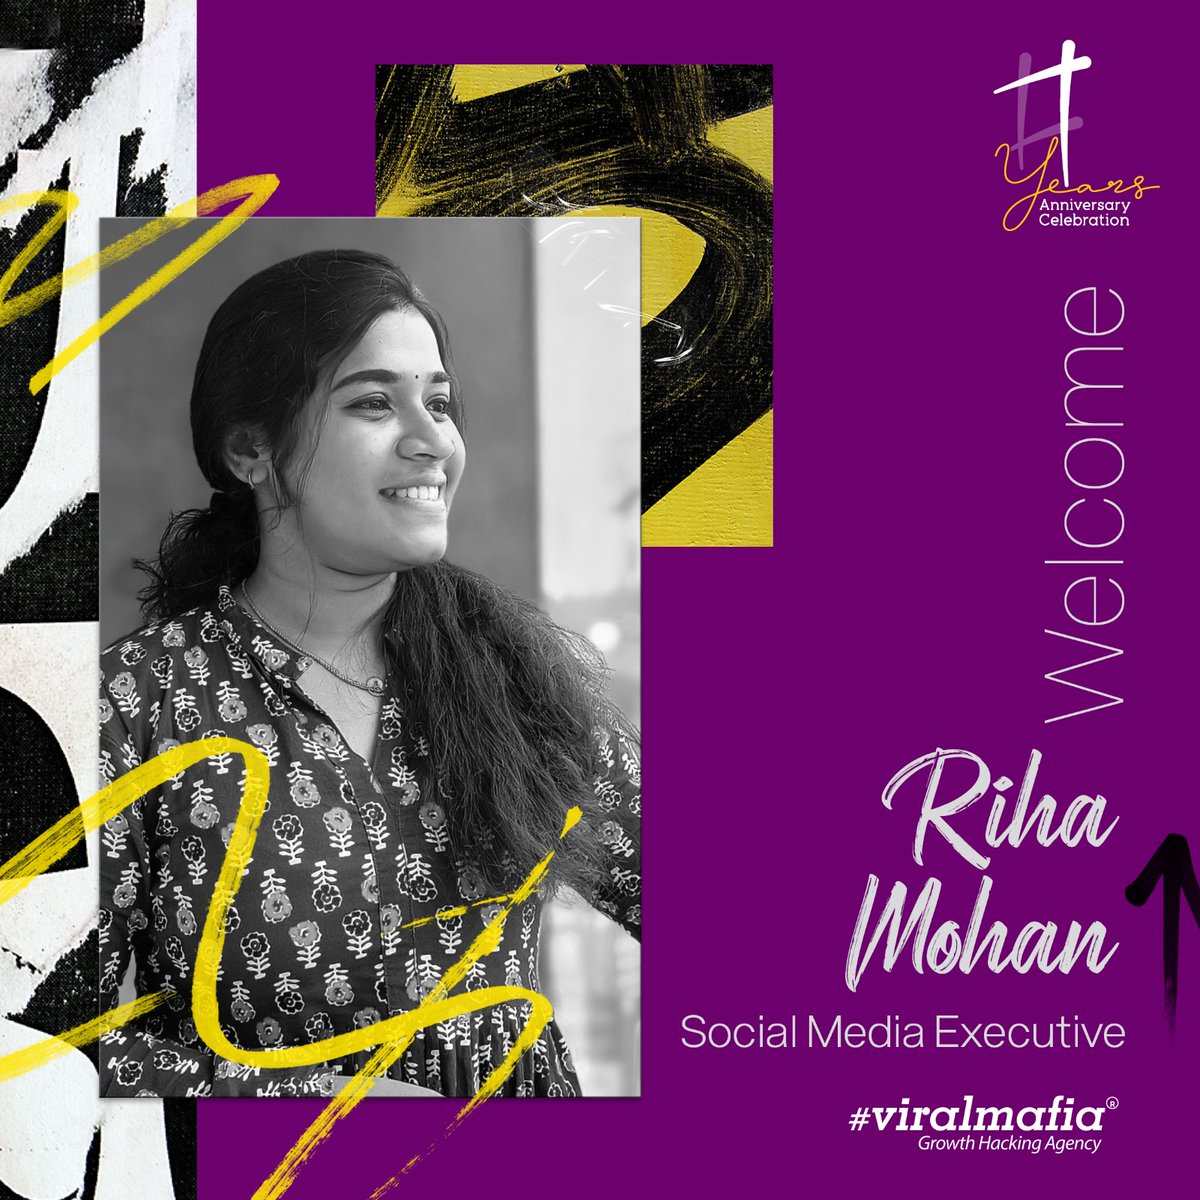 Dear Riha,
We heartily welcome you to Viralmafia. We are thrilled to see you grow professionally and personally. May your skills help you to make your future brighter. All the best
theviralmafia.com
#welcomeonboard #ViralMafia #DigitalMarketing #DigitalMarketingAgency